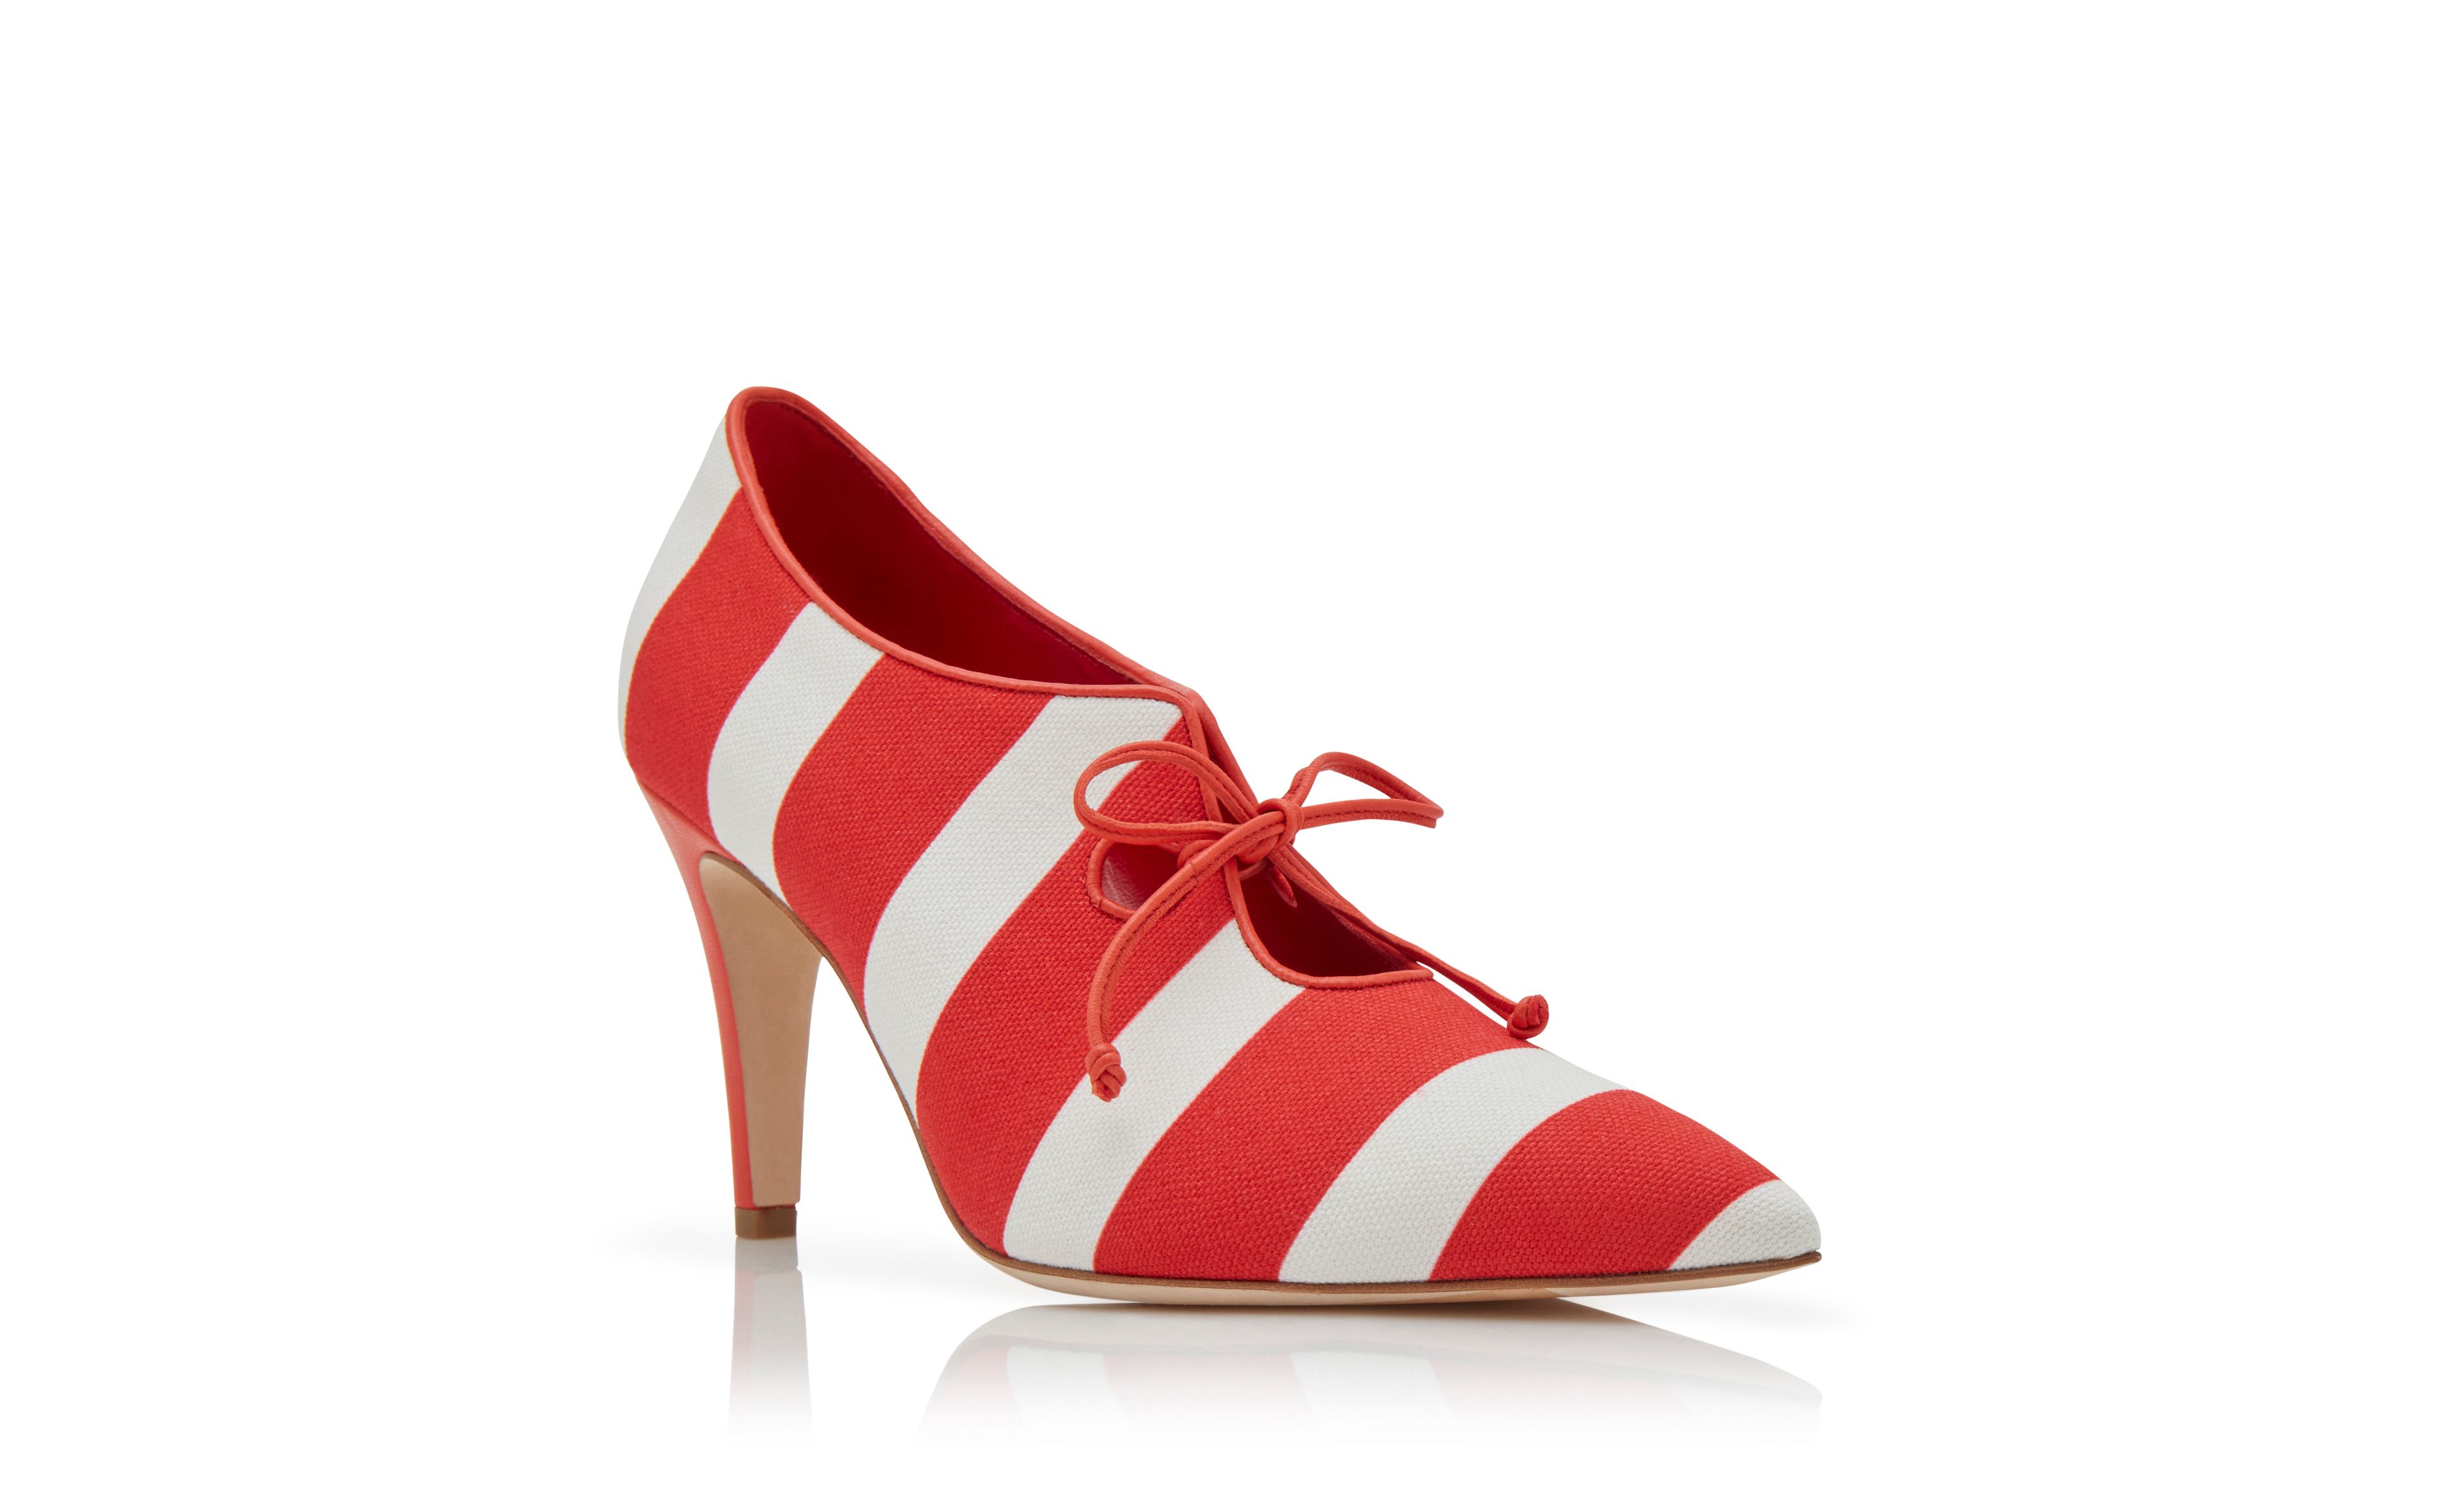 Designer Red and White Cotton Lace-Up Pumps - Image Upsell